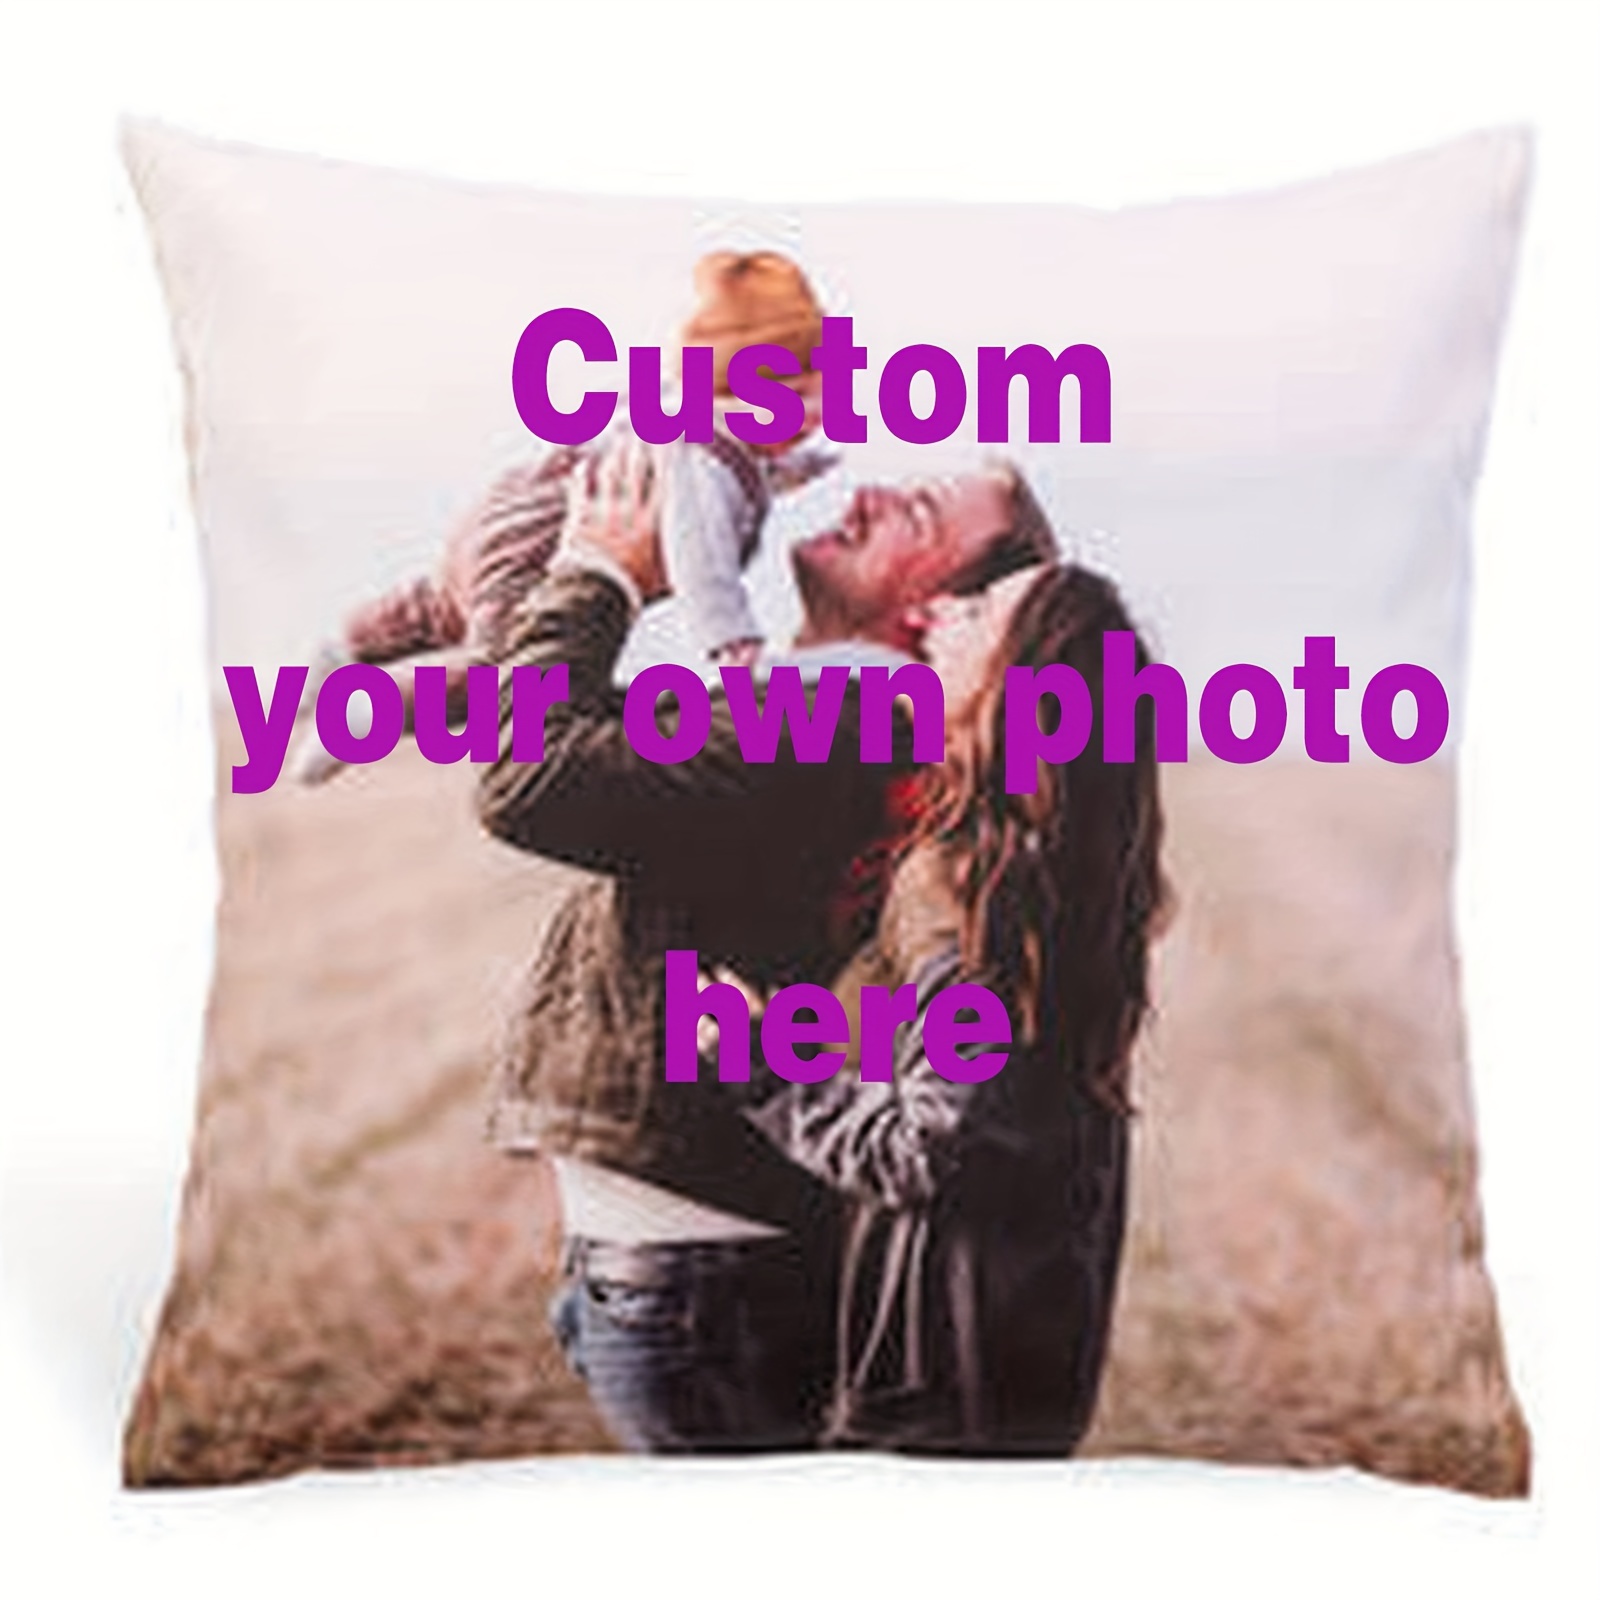 

1pc Pillow Case Personalized Single-sided Printed Throw Pillow With Custom Photo, Cushion With Insert With Custom Wedding Pictures, For Lovers On Valentine's Day Wedding Anniversary